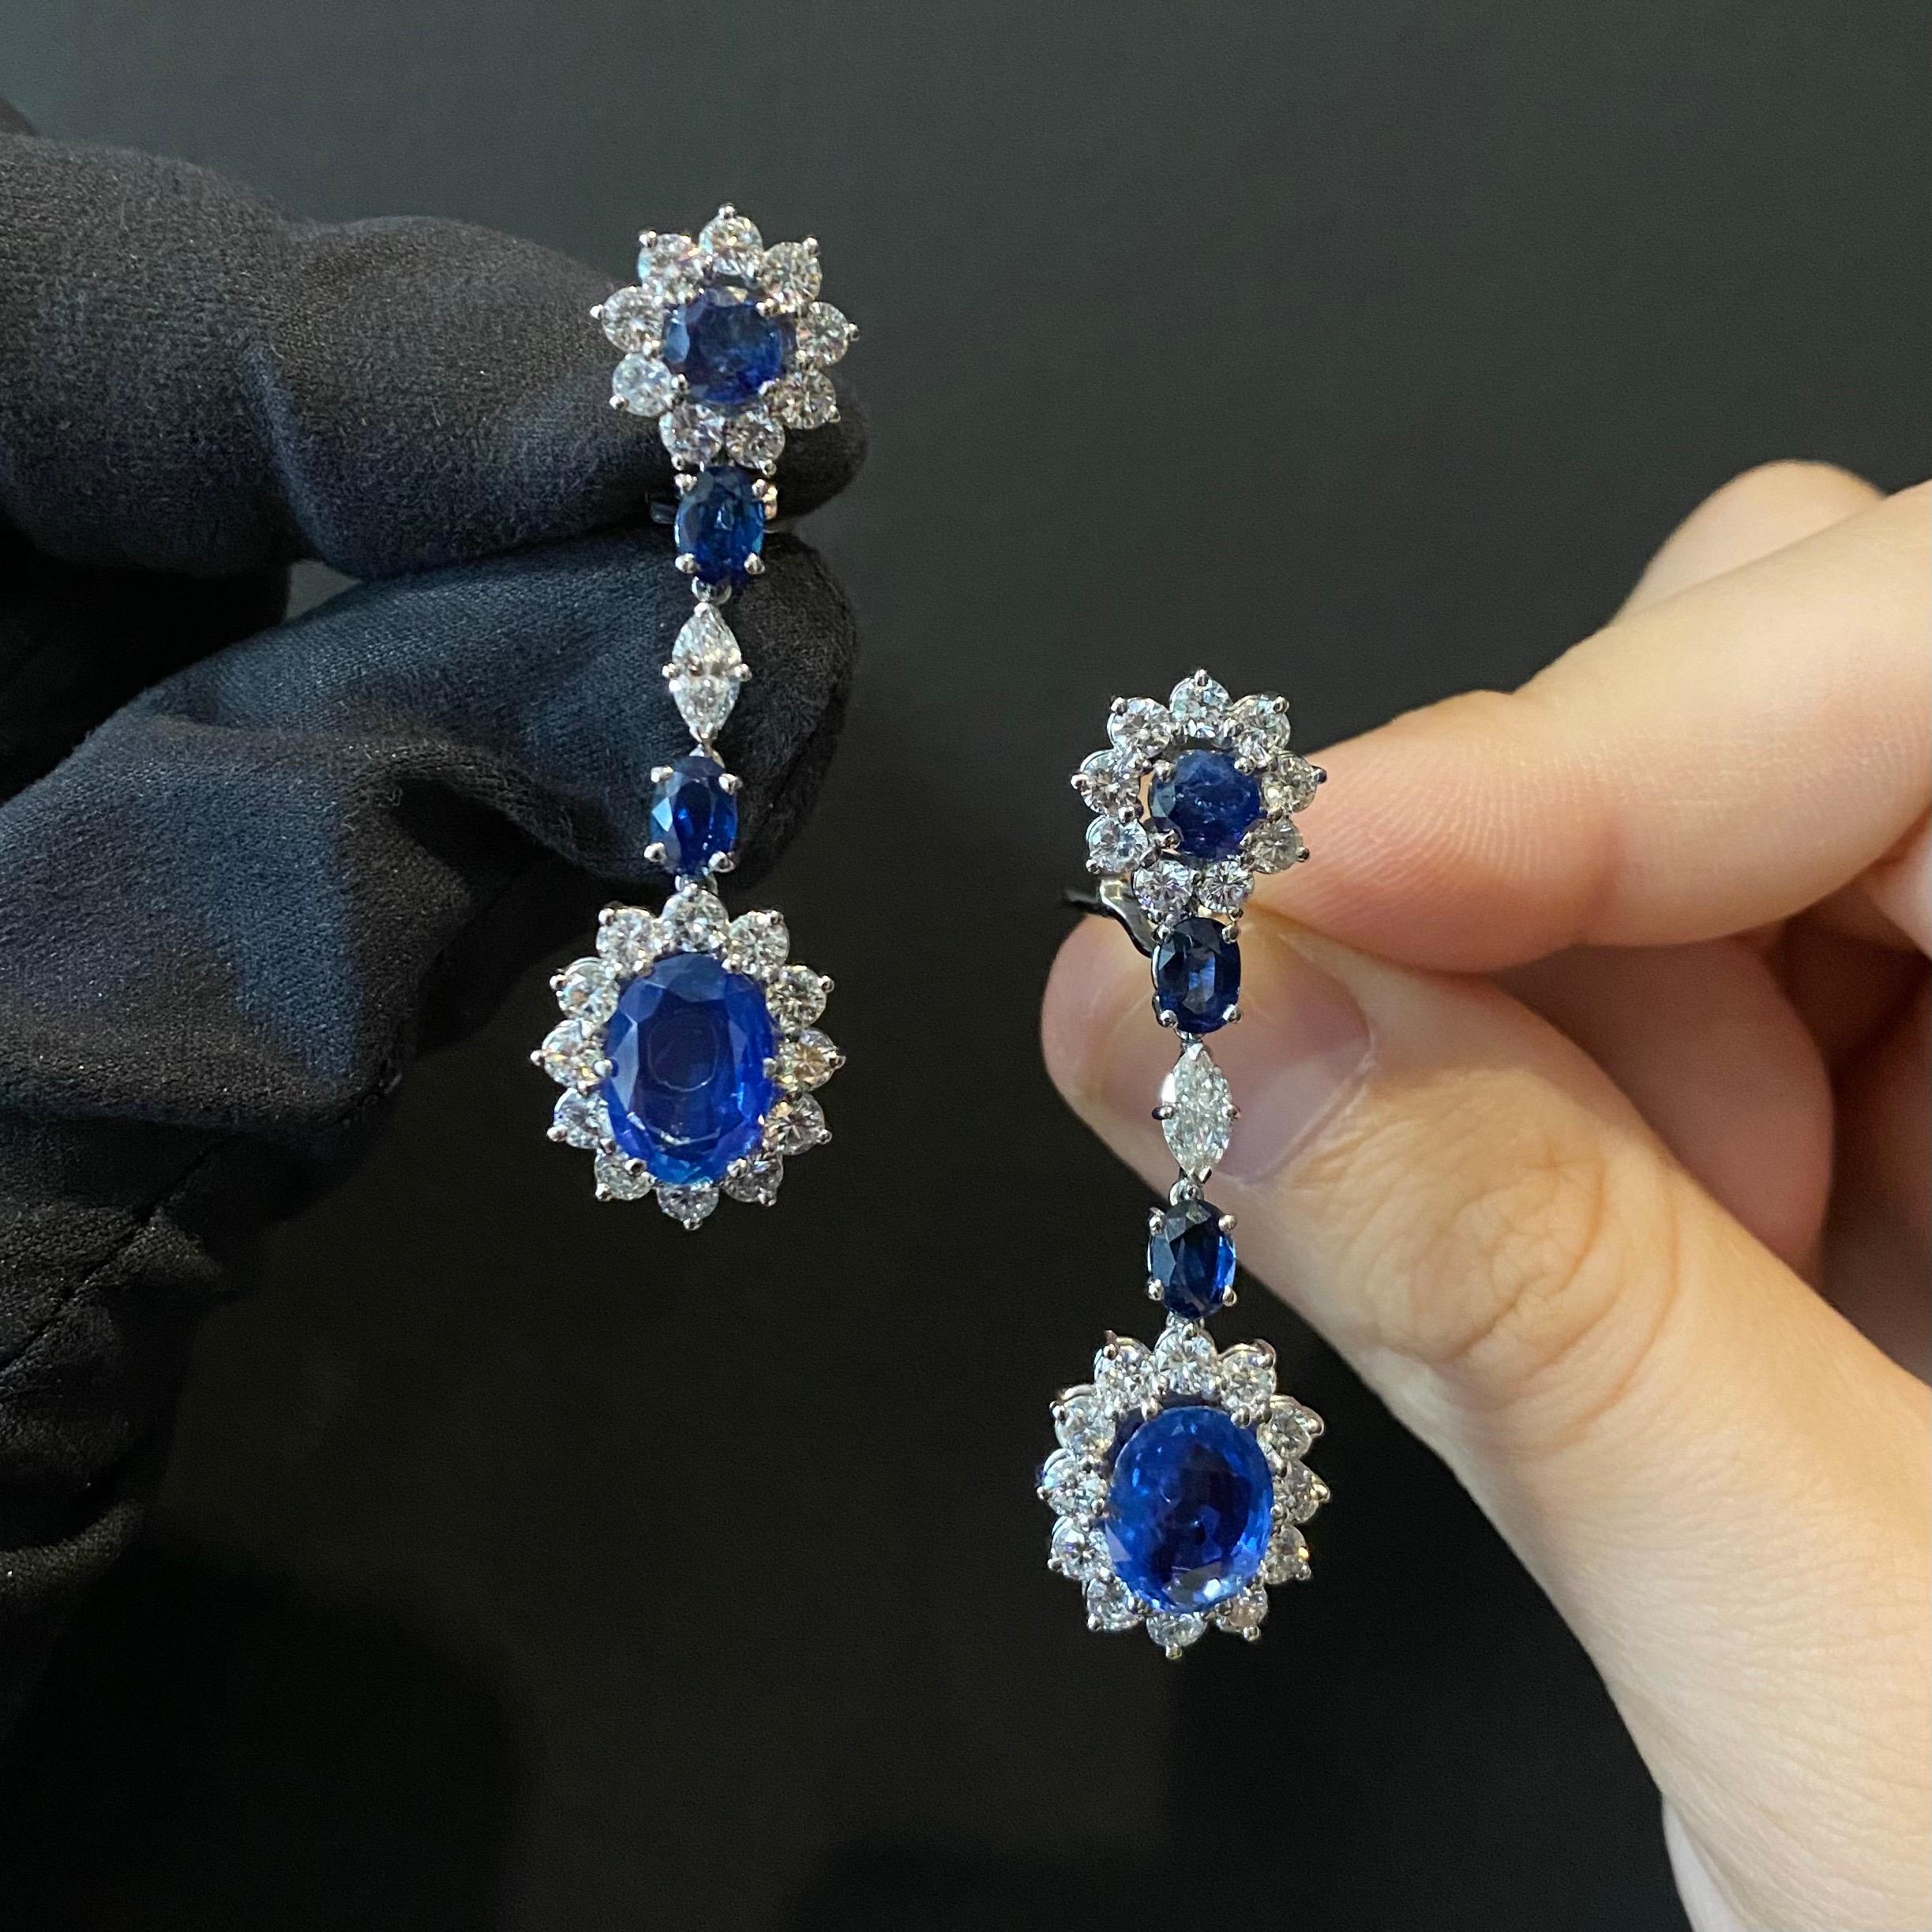 1950s Ceylon Sapphire and Diamond Cluster Drop Earrings in Platinum and White Gold, Portuguese. Each earring is designed as a circular sapphire and round brilliant-cut diamond cluster surmount suspending a larger oval sapphire and round